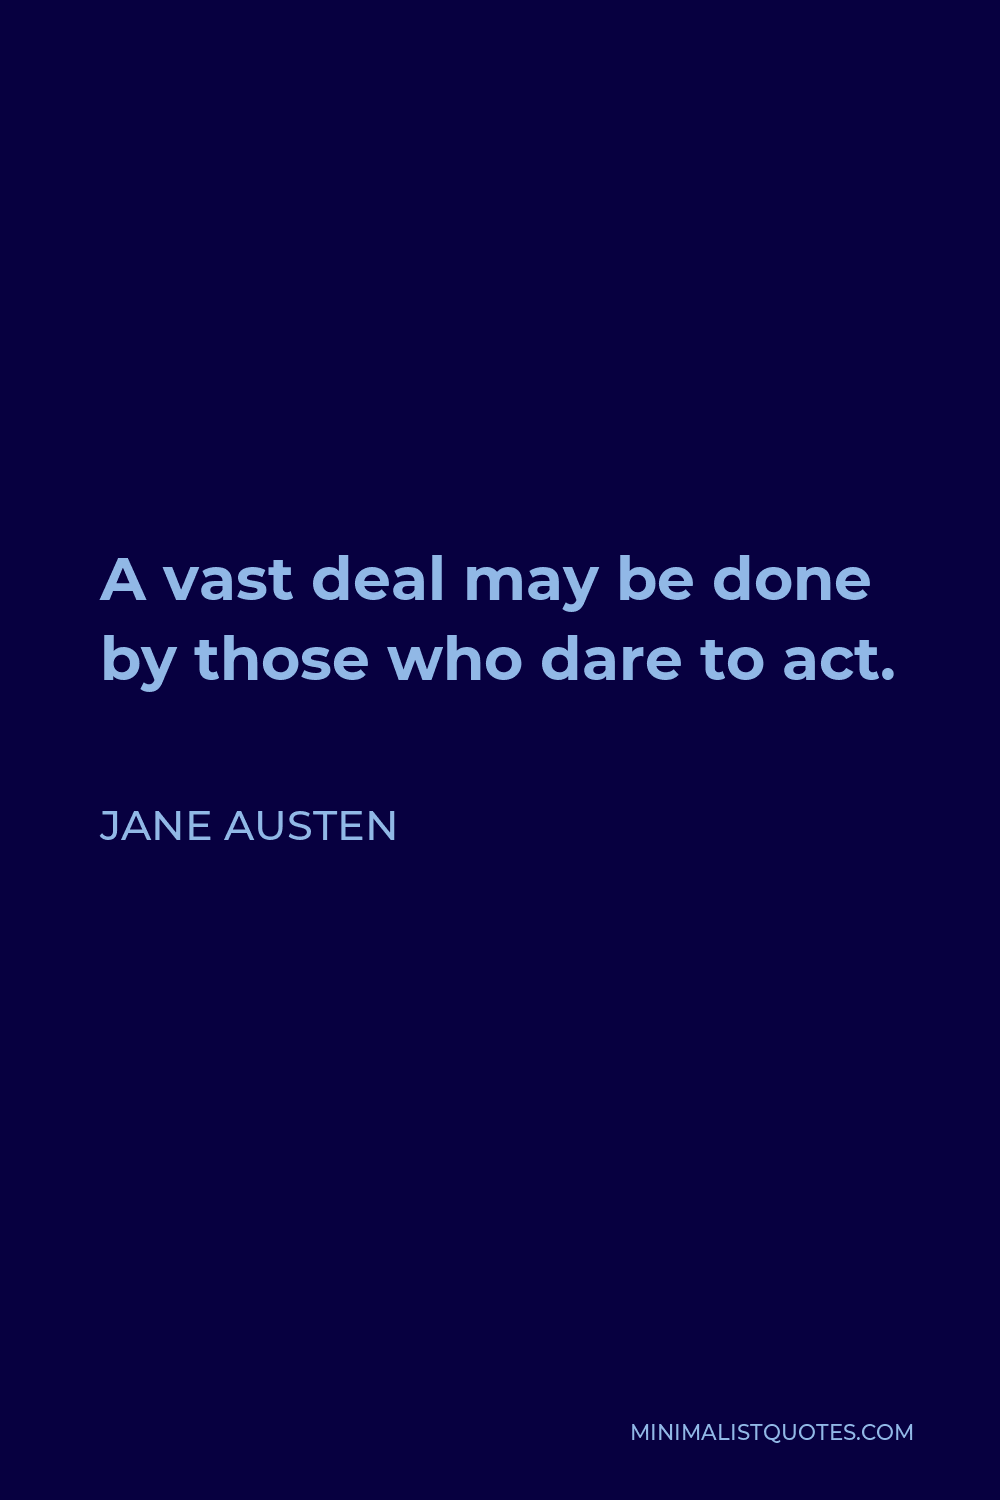 Jane Austen Quote - A vast deal may be done by those who dare to act.